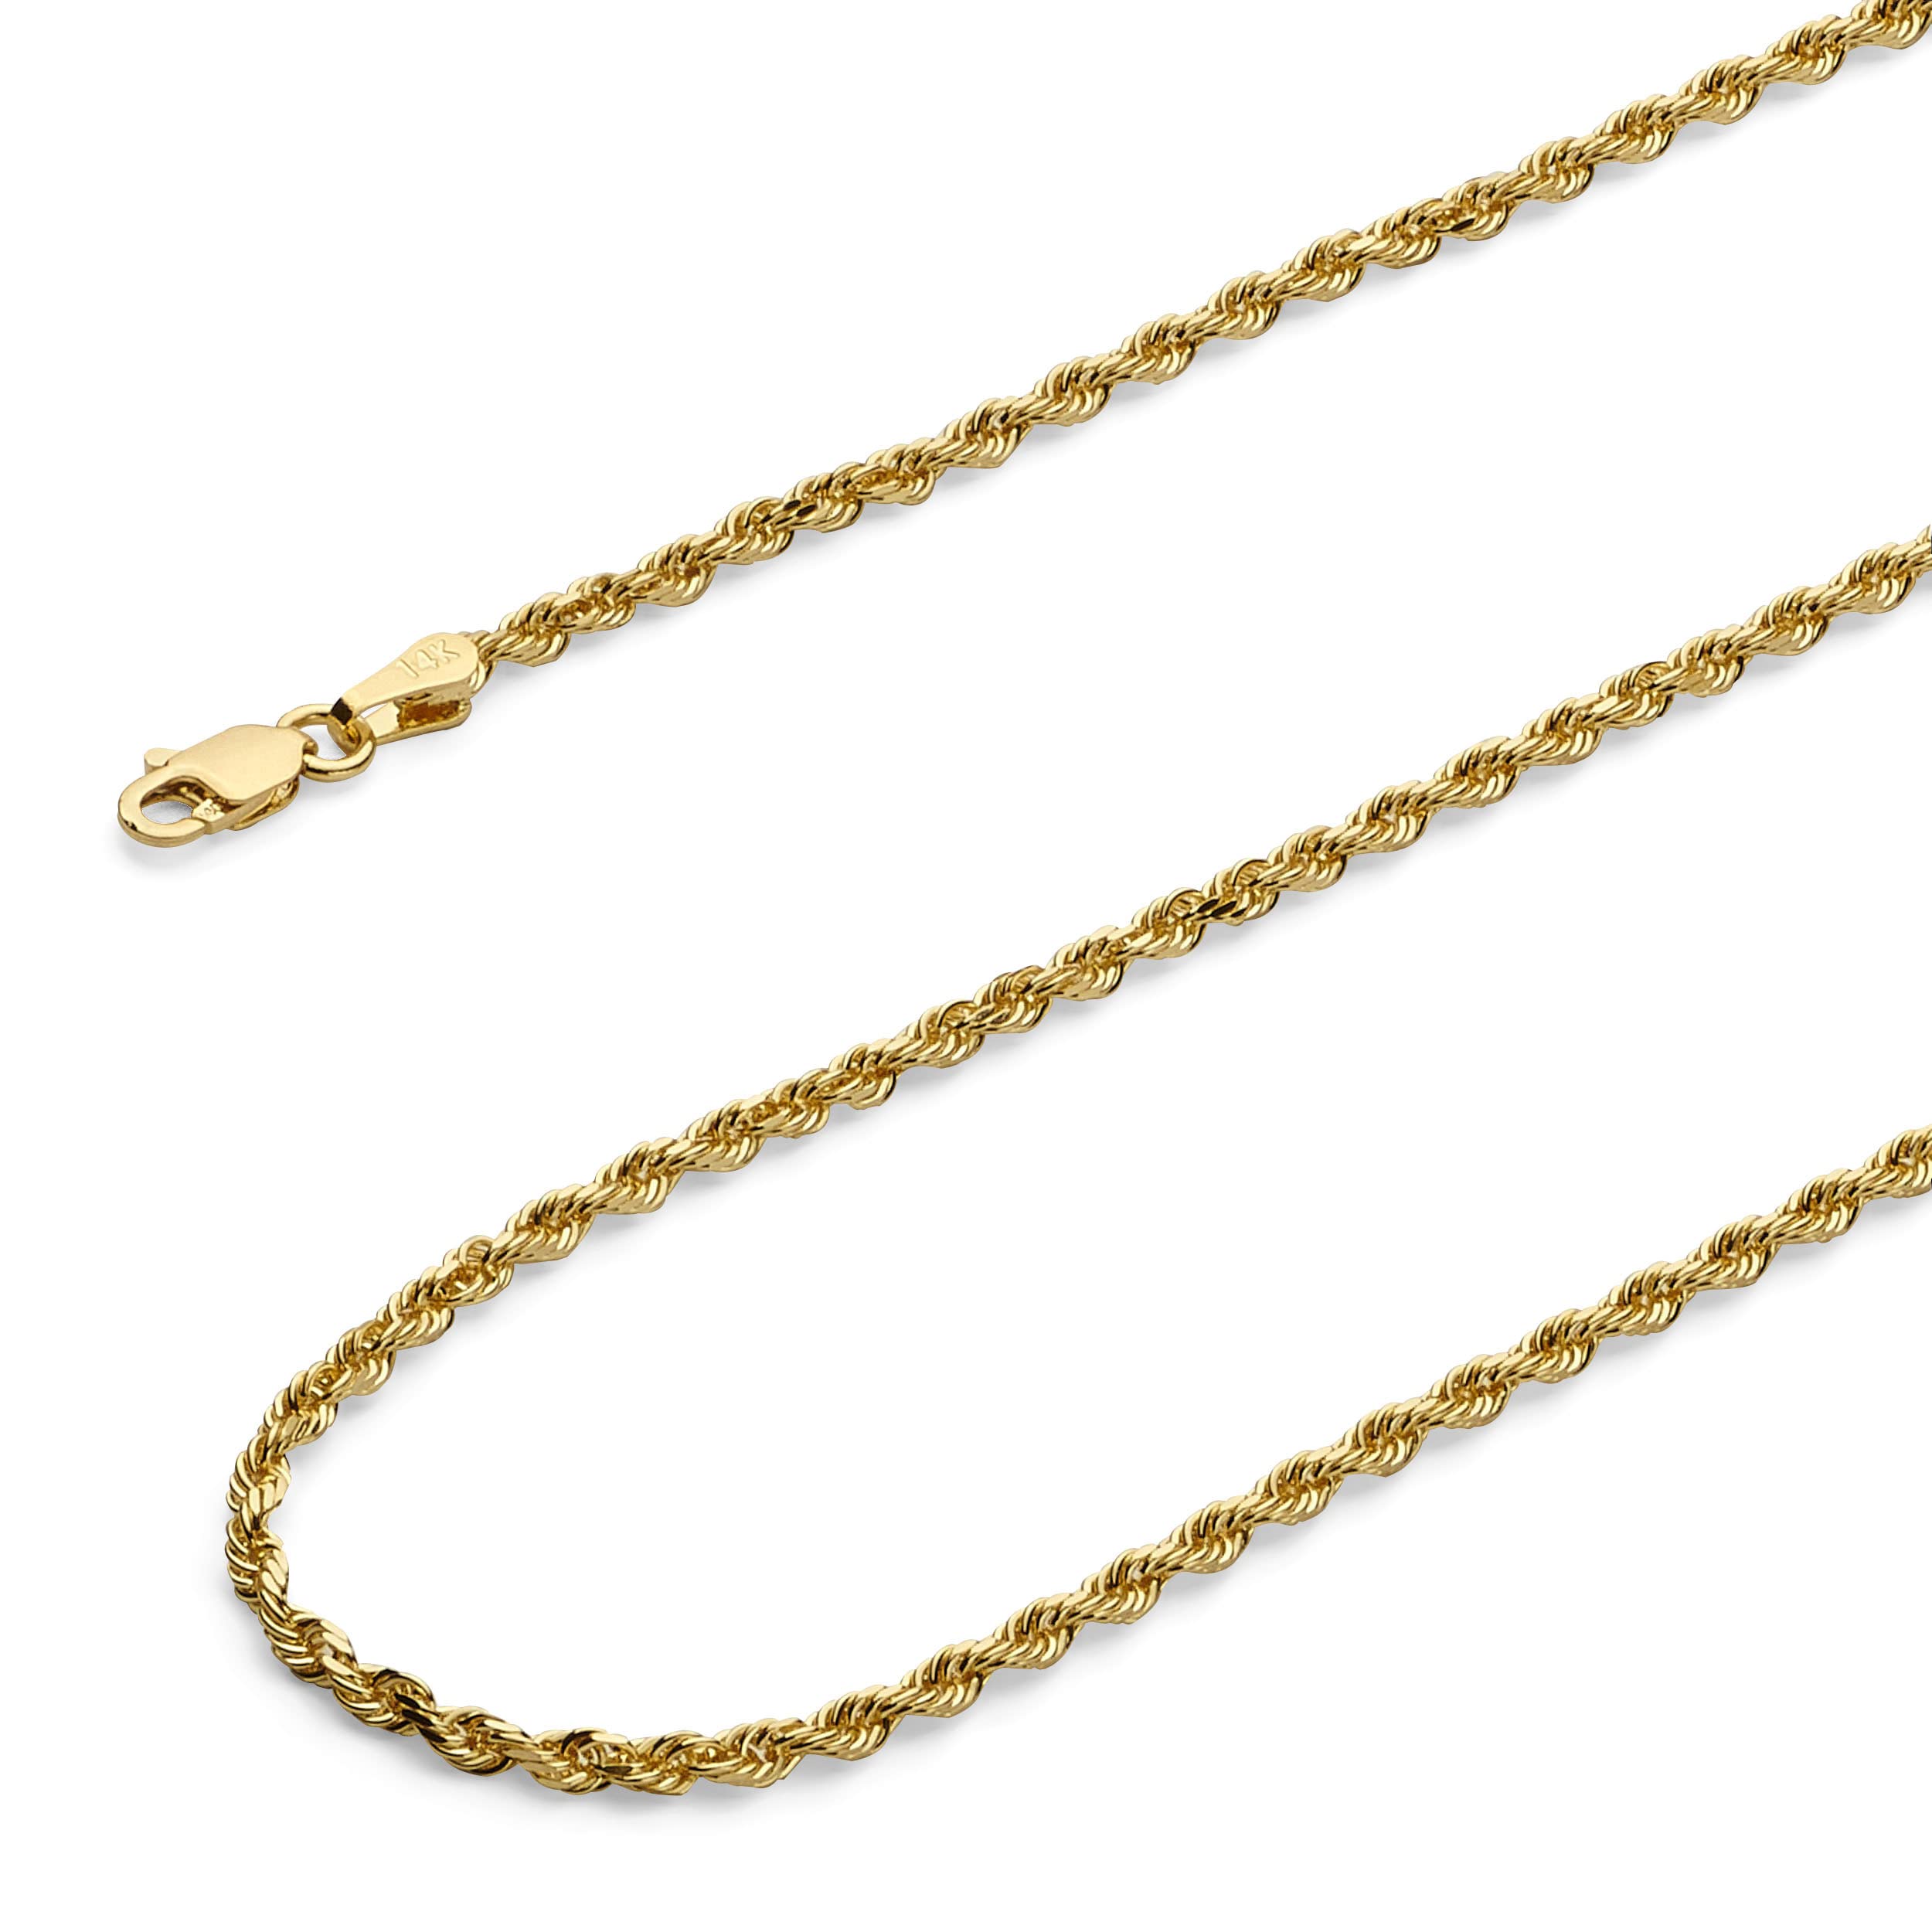 Wellingsale 14k Yellow Gold Solid 3mm Diamond Cut Solid Rope Chain Necklace with Lobster Claw Clasp